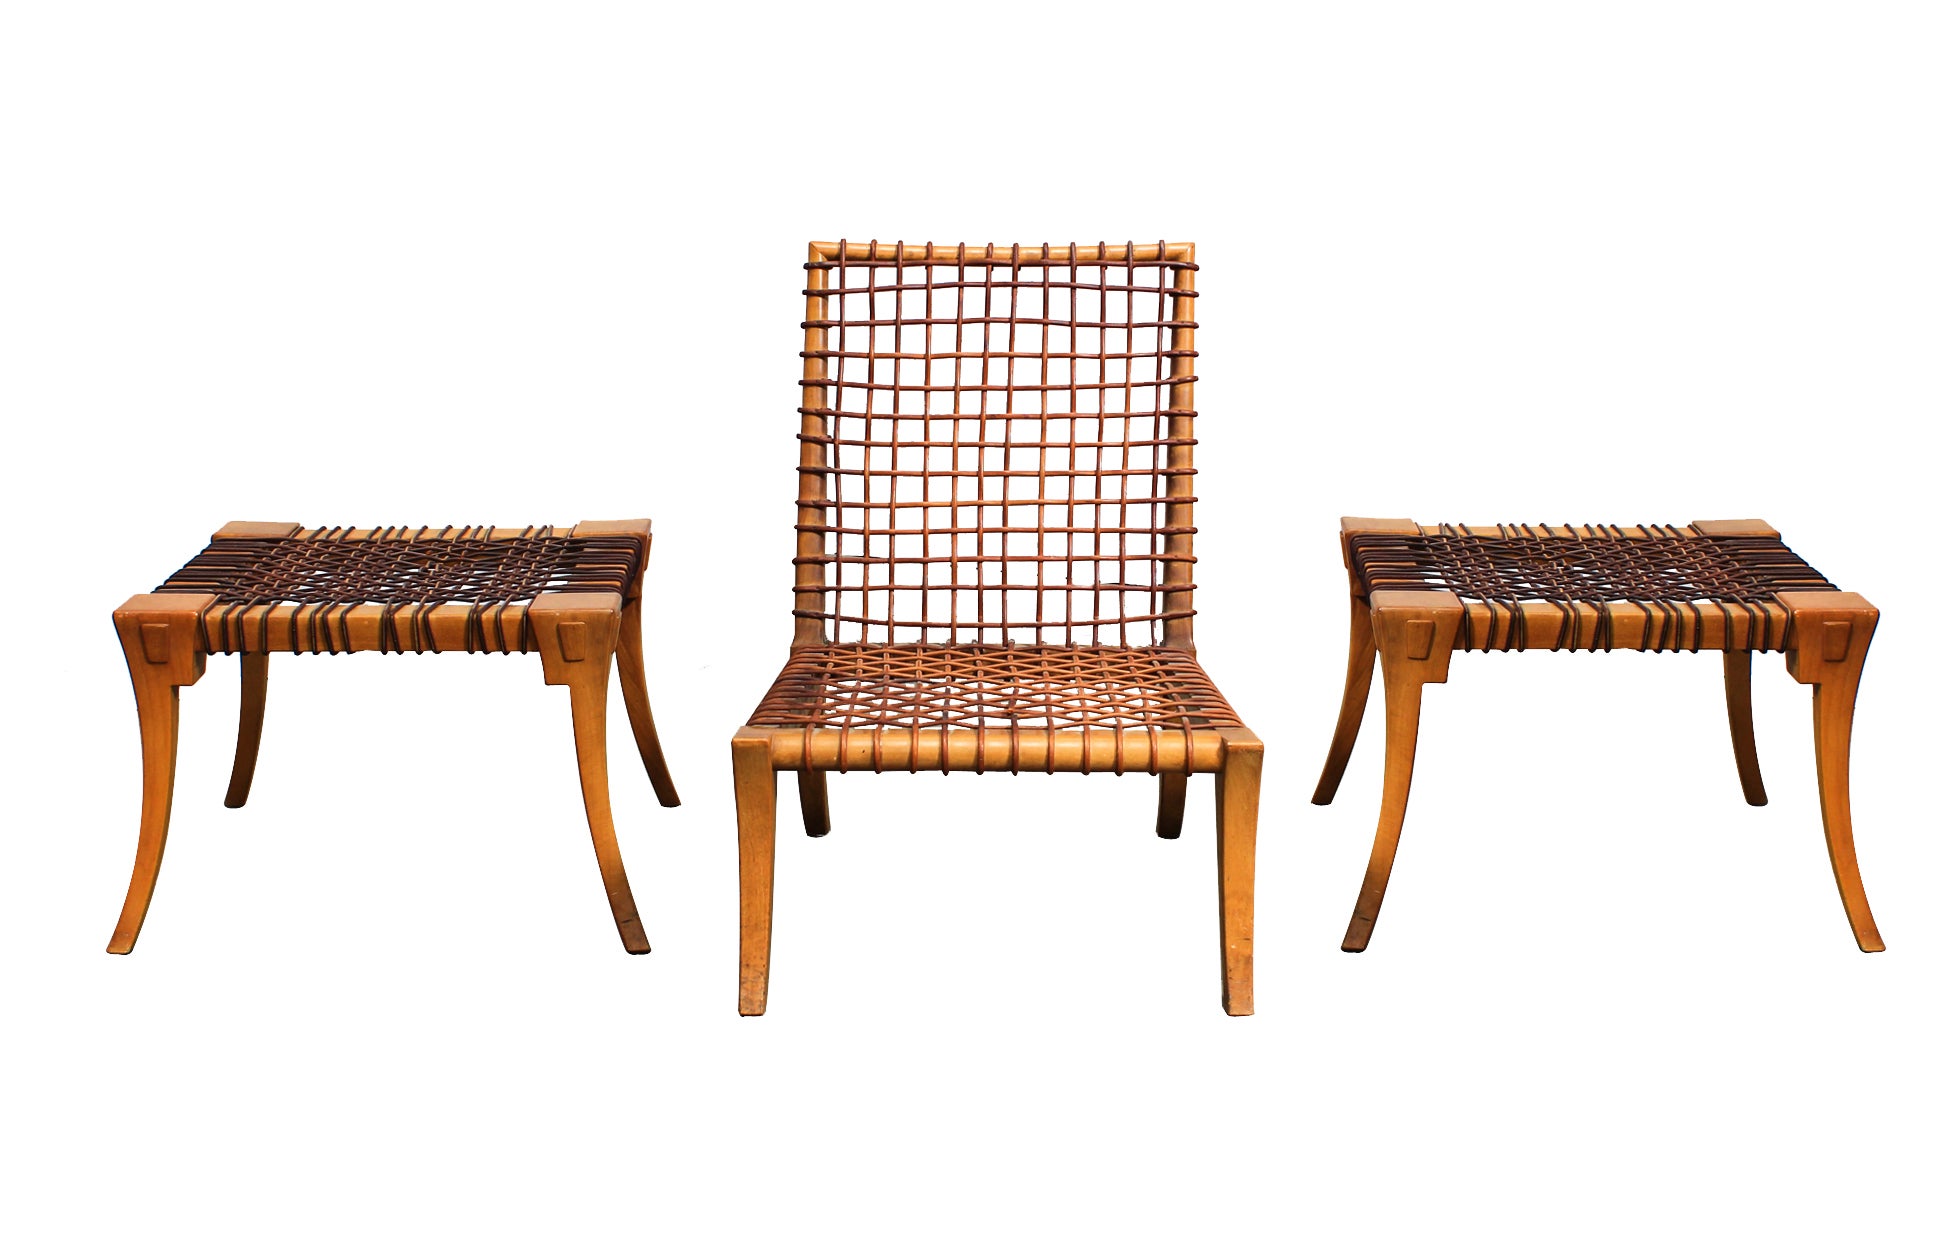 A "Klismos" Slipper Chair with Footstools by T.H. Robsjohn Gibbings for Saridis